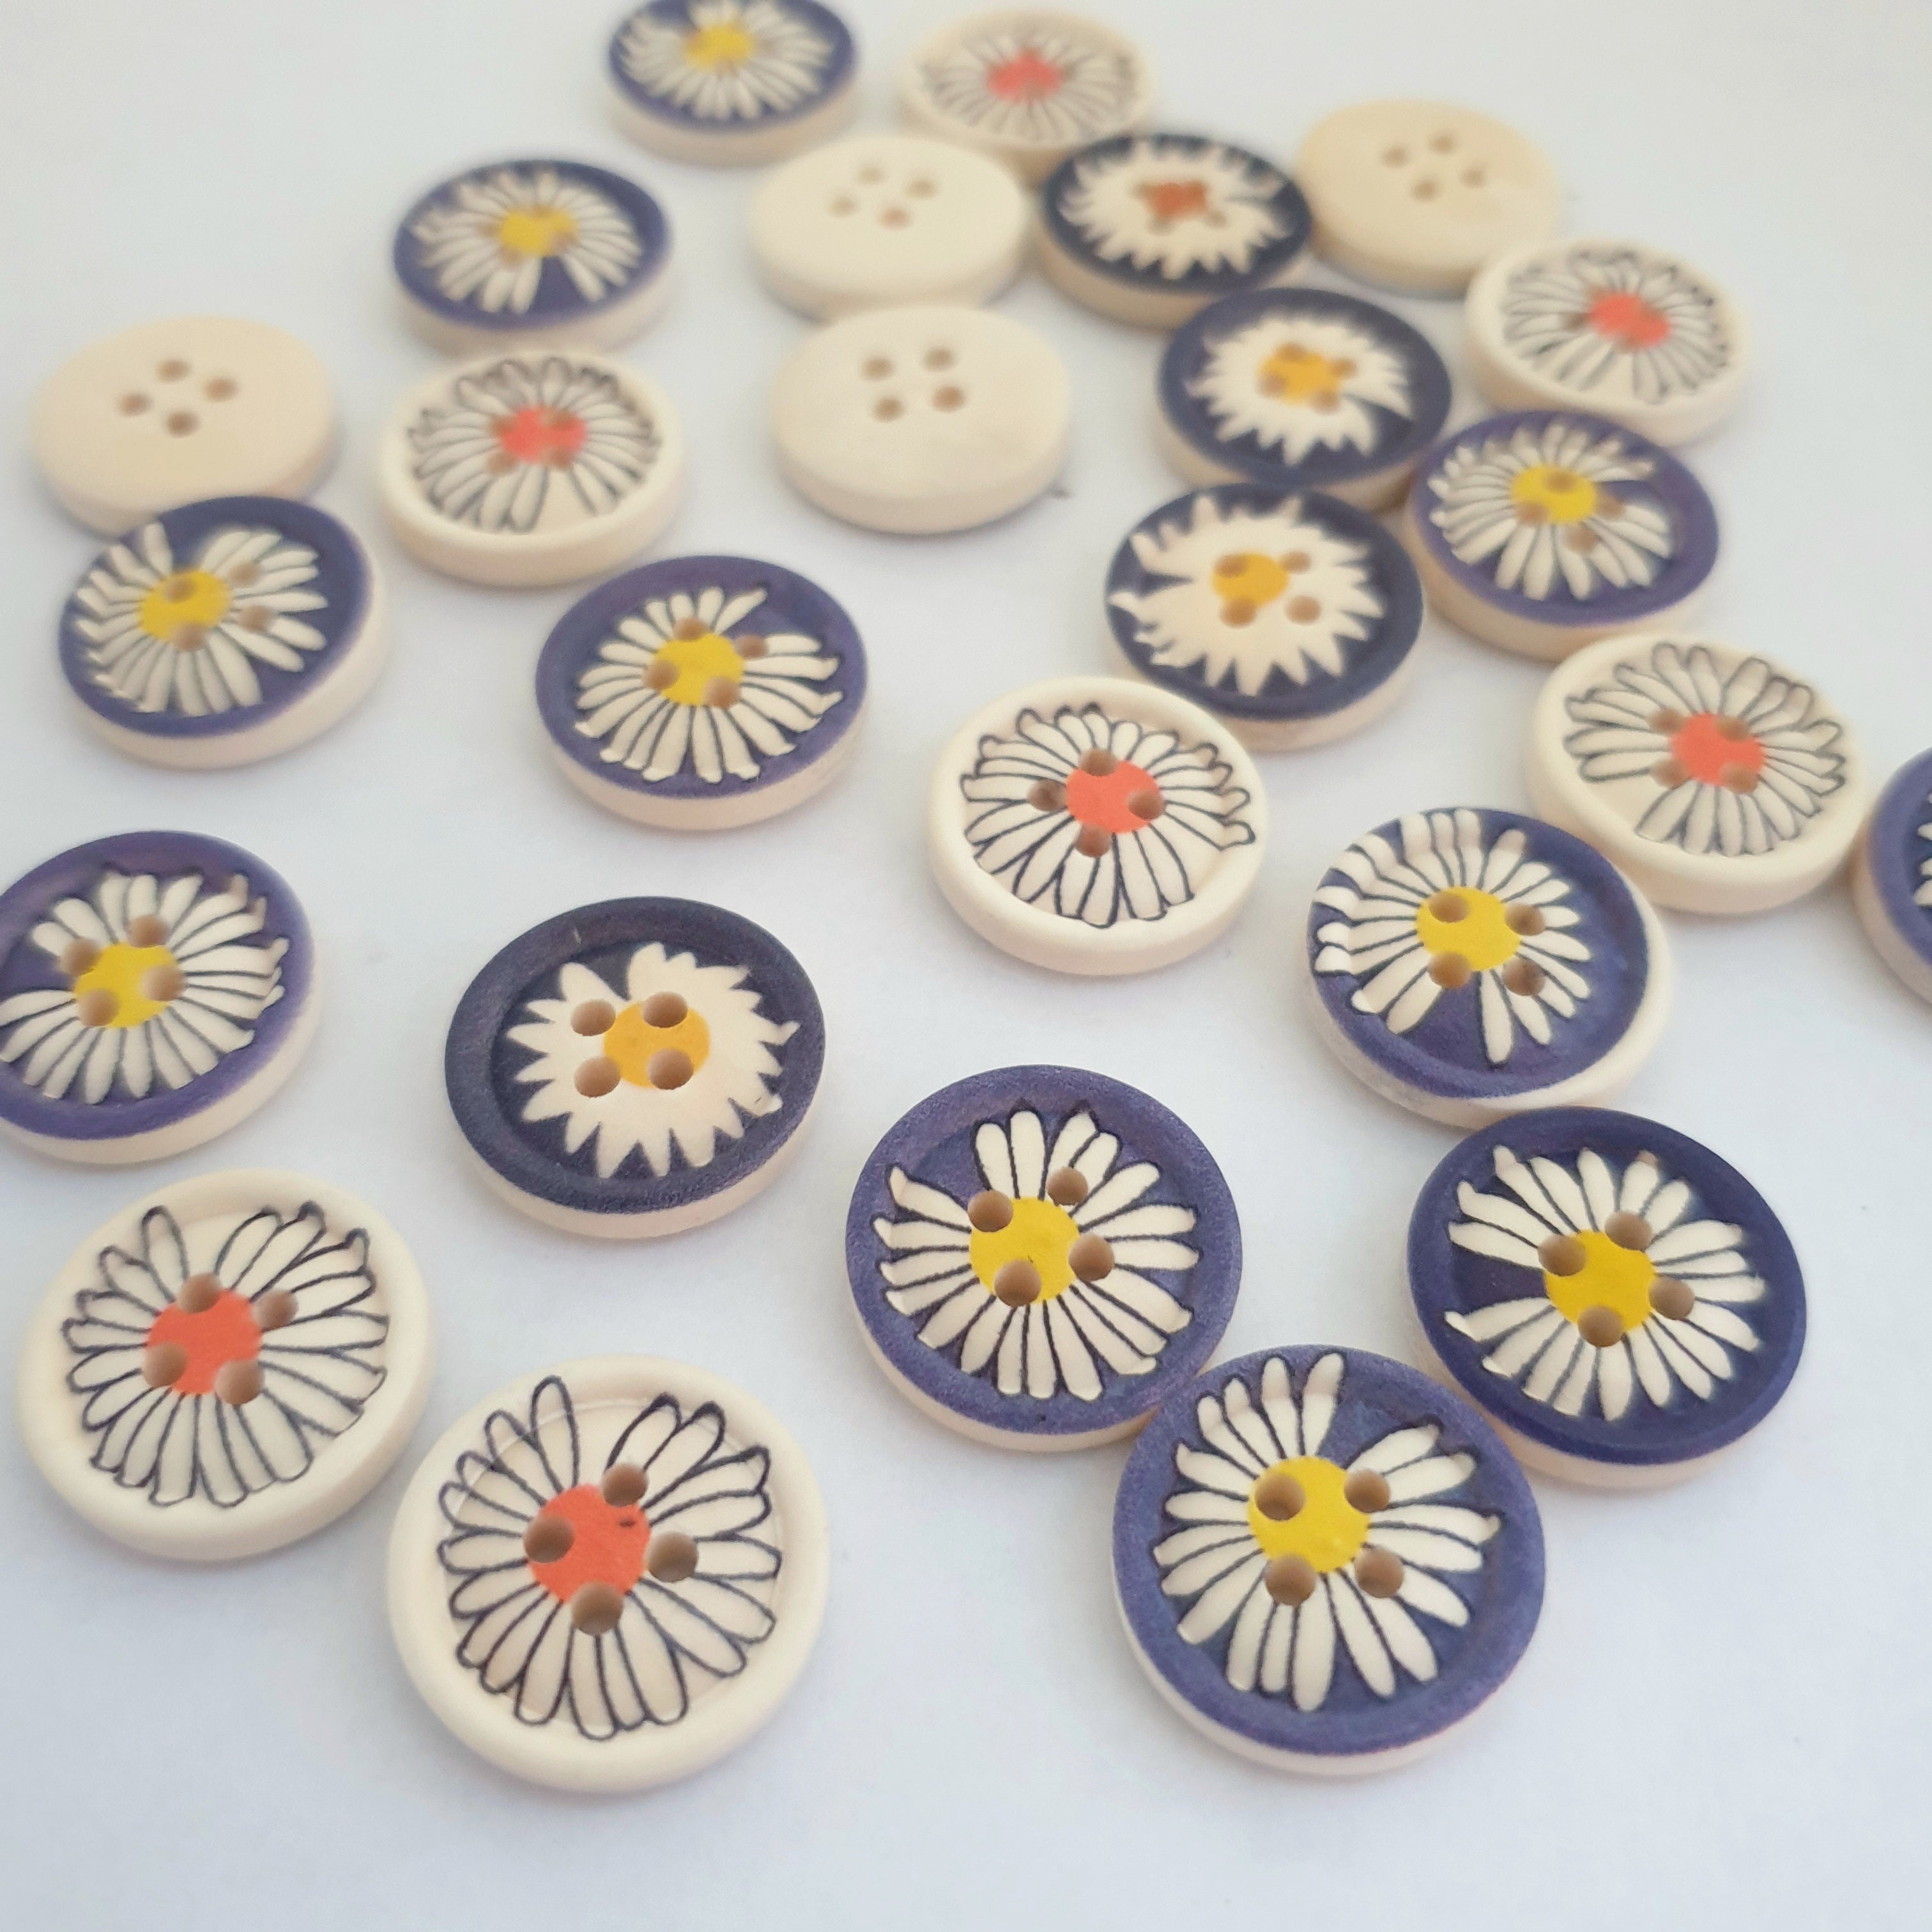 MajorCrafts 24pcs 18mm Mixed Colours Daisy Flower Pattern Round 4 Holes Wooden Sewing Buttons